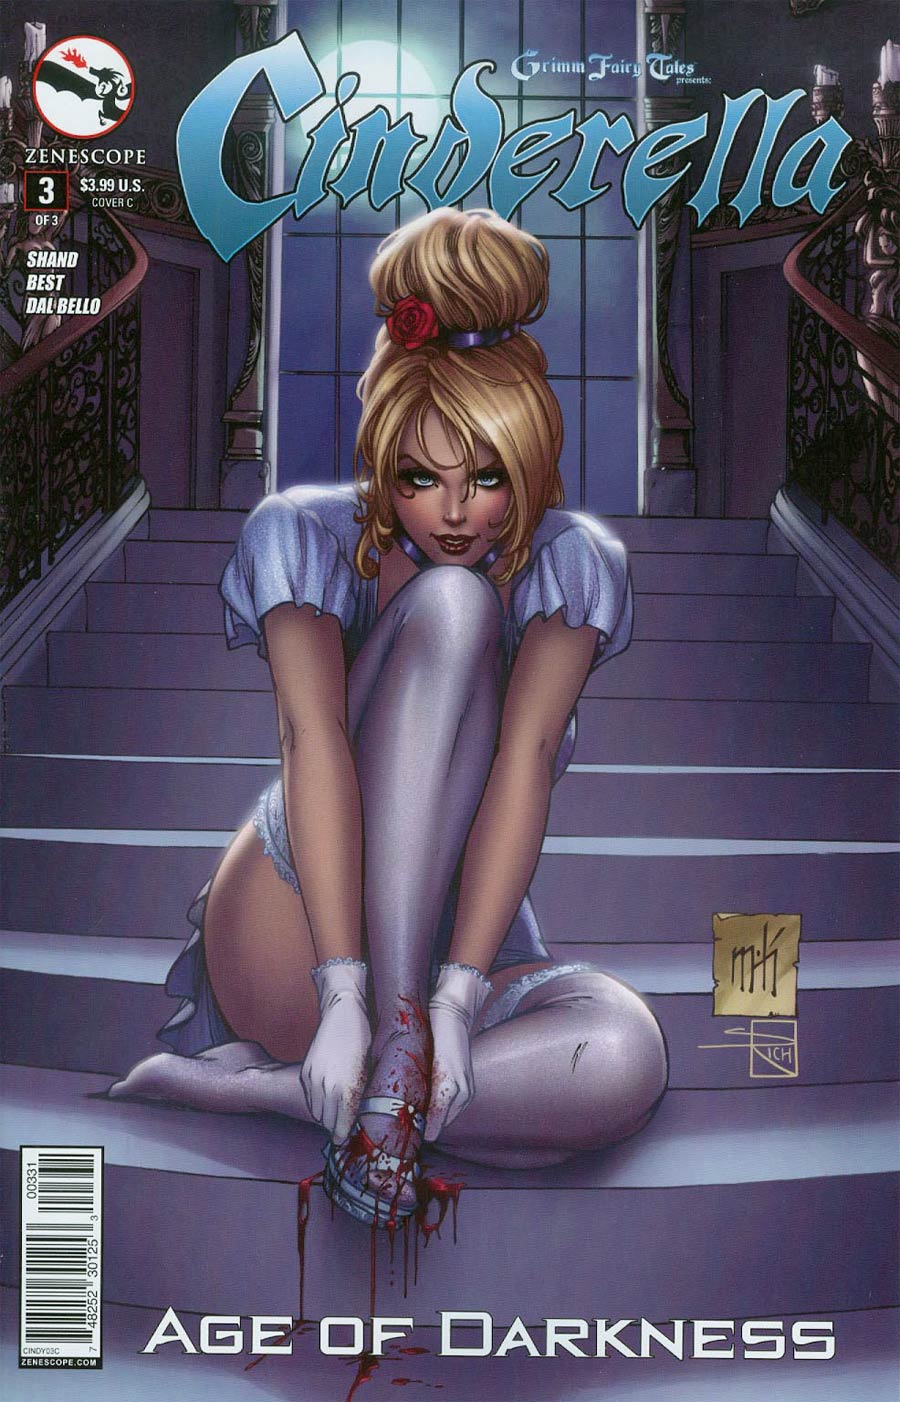 Grimm Fairy Tales Presents Cinderella #3 Cover C Mike Krome & Sabine Rich (Age Of Darkness Tie-In)